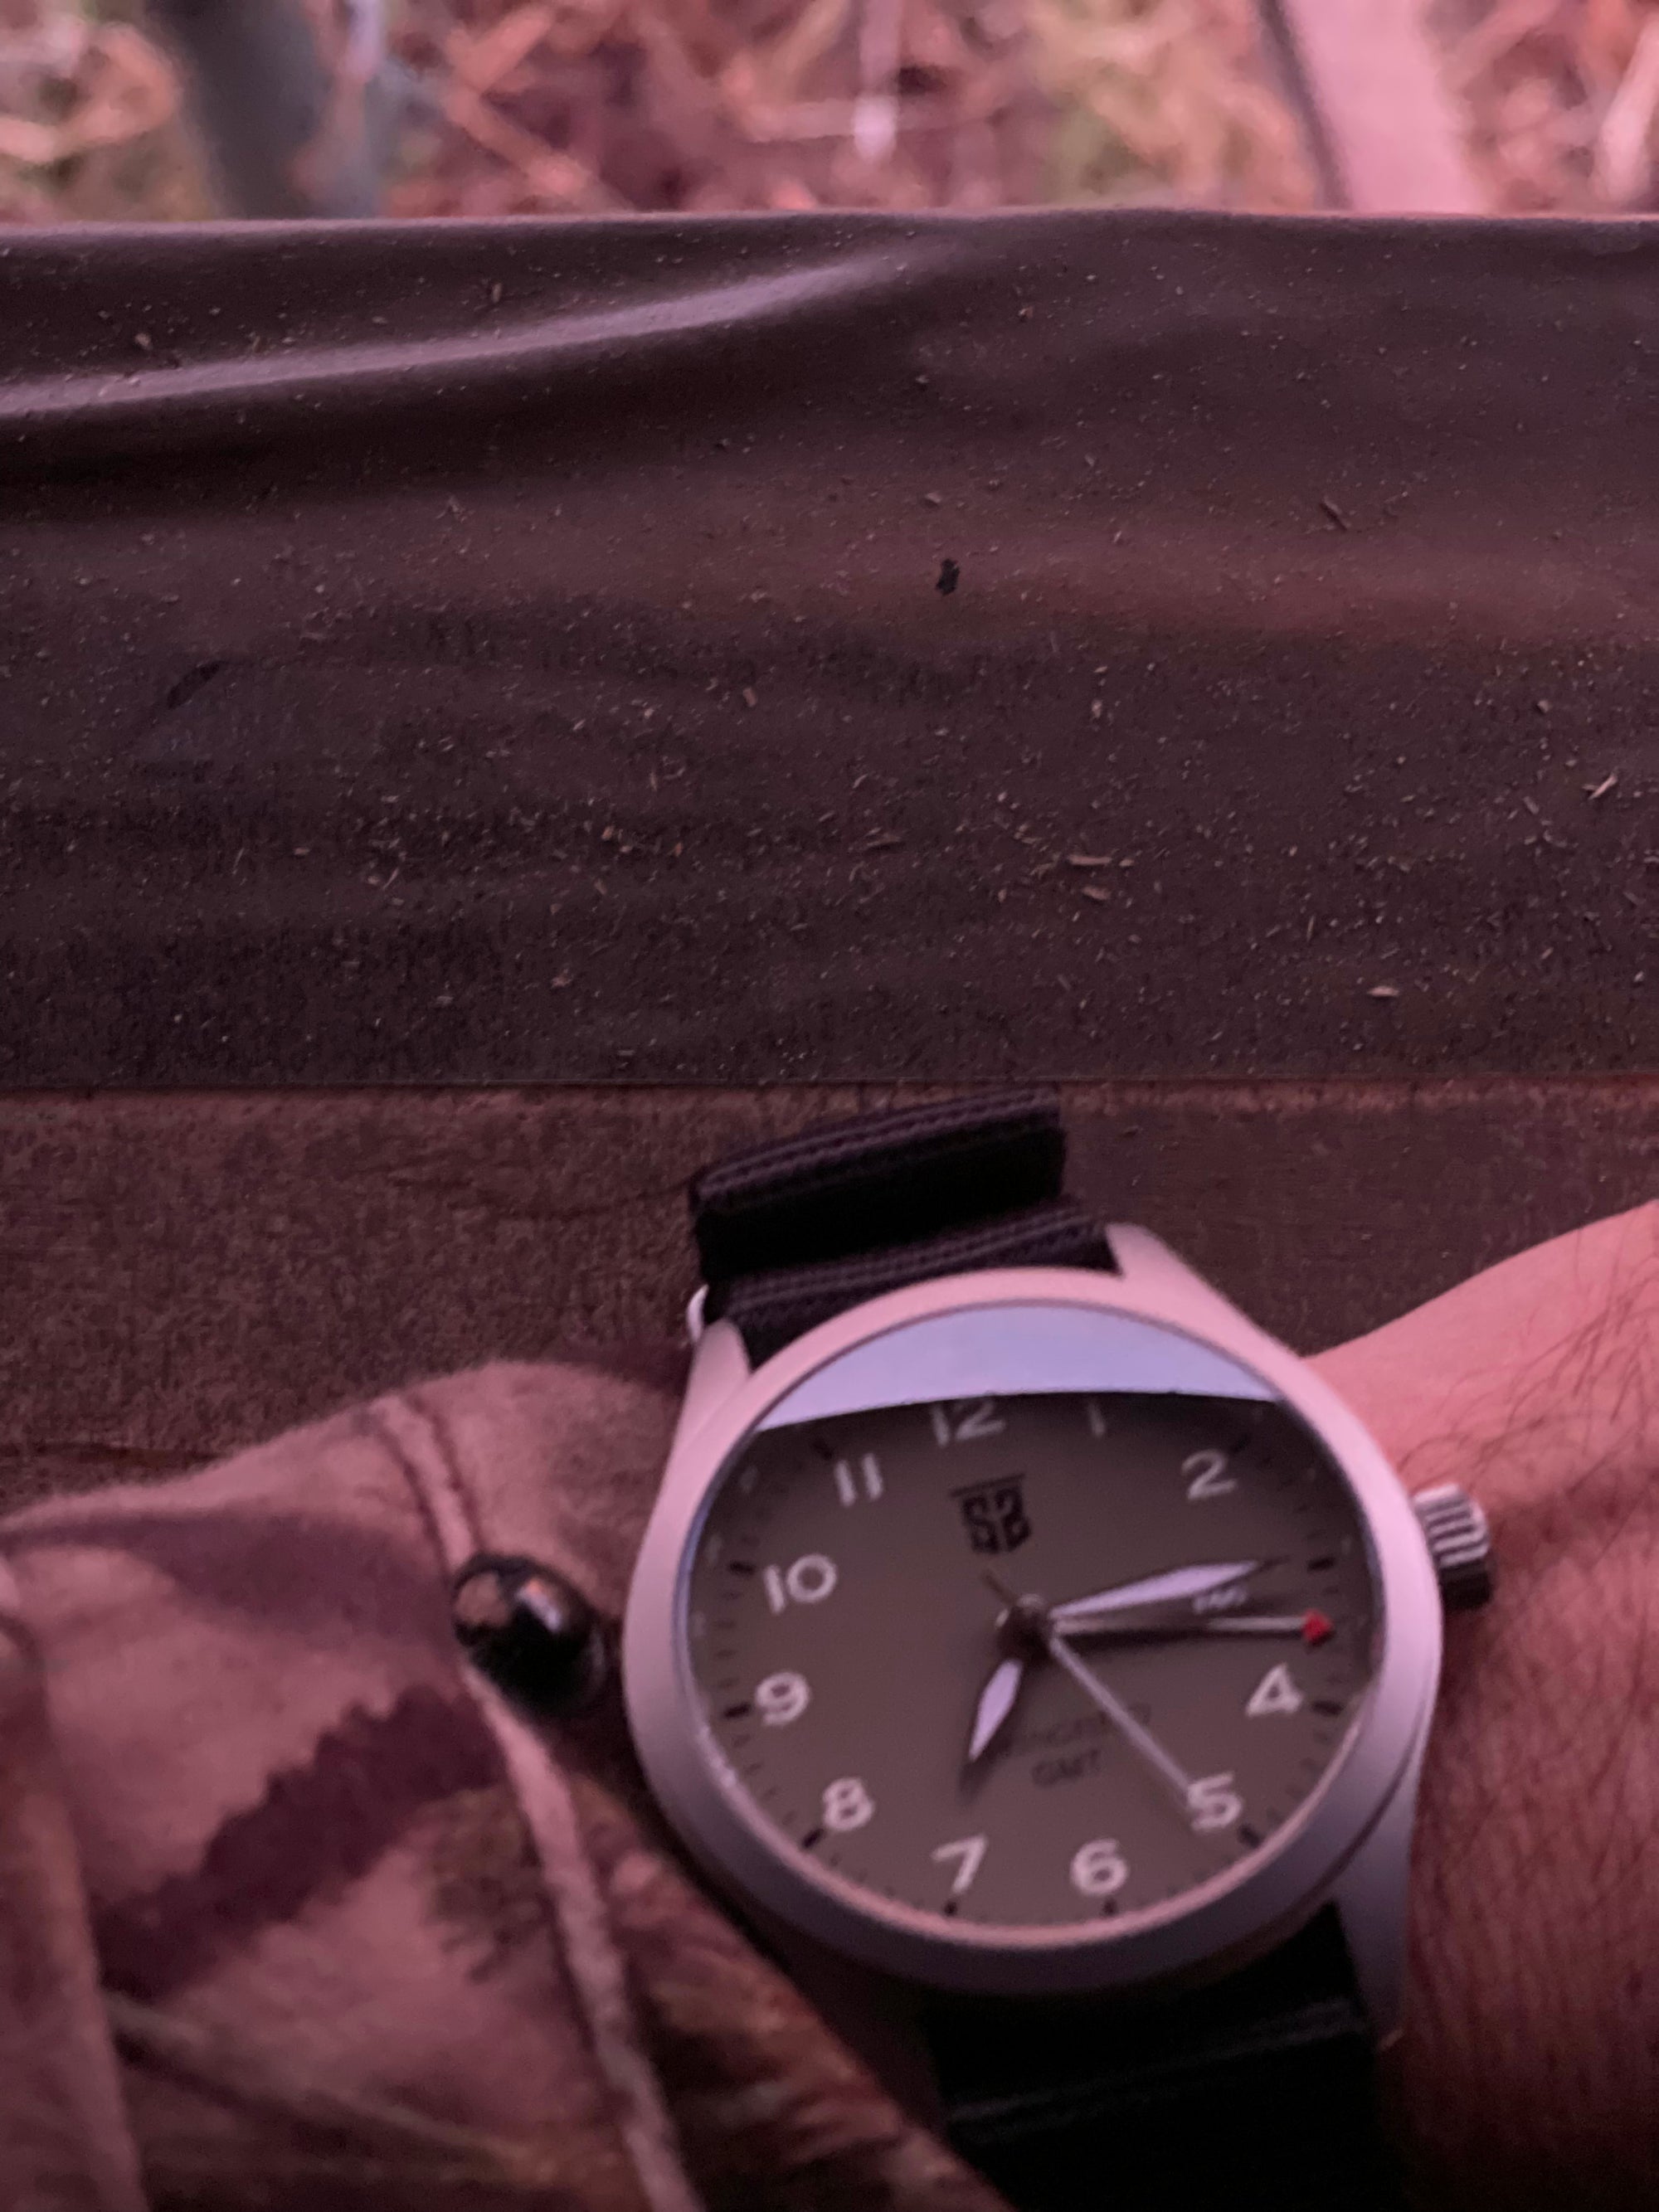 On the Hunt with a Tactical Watch